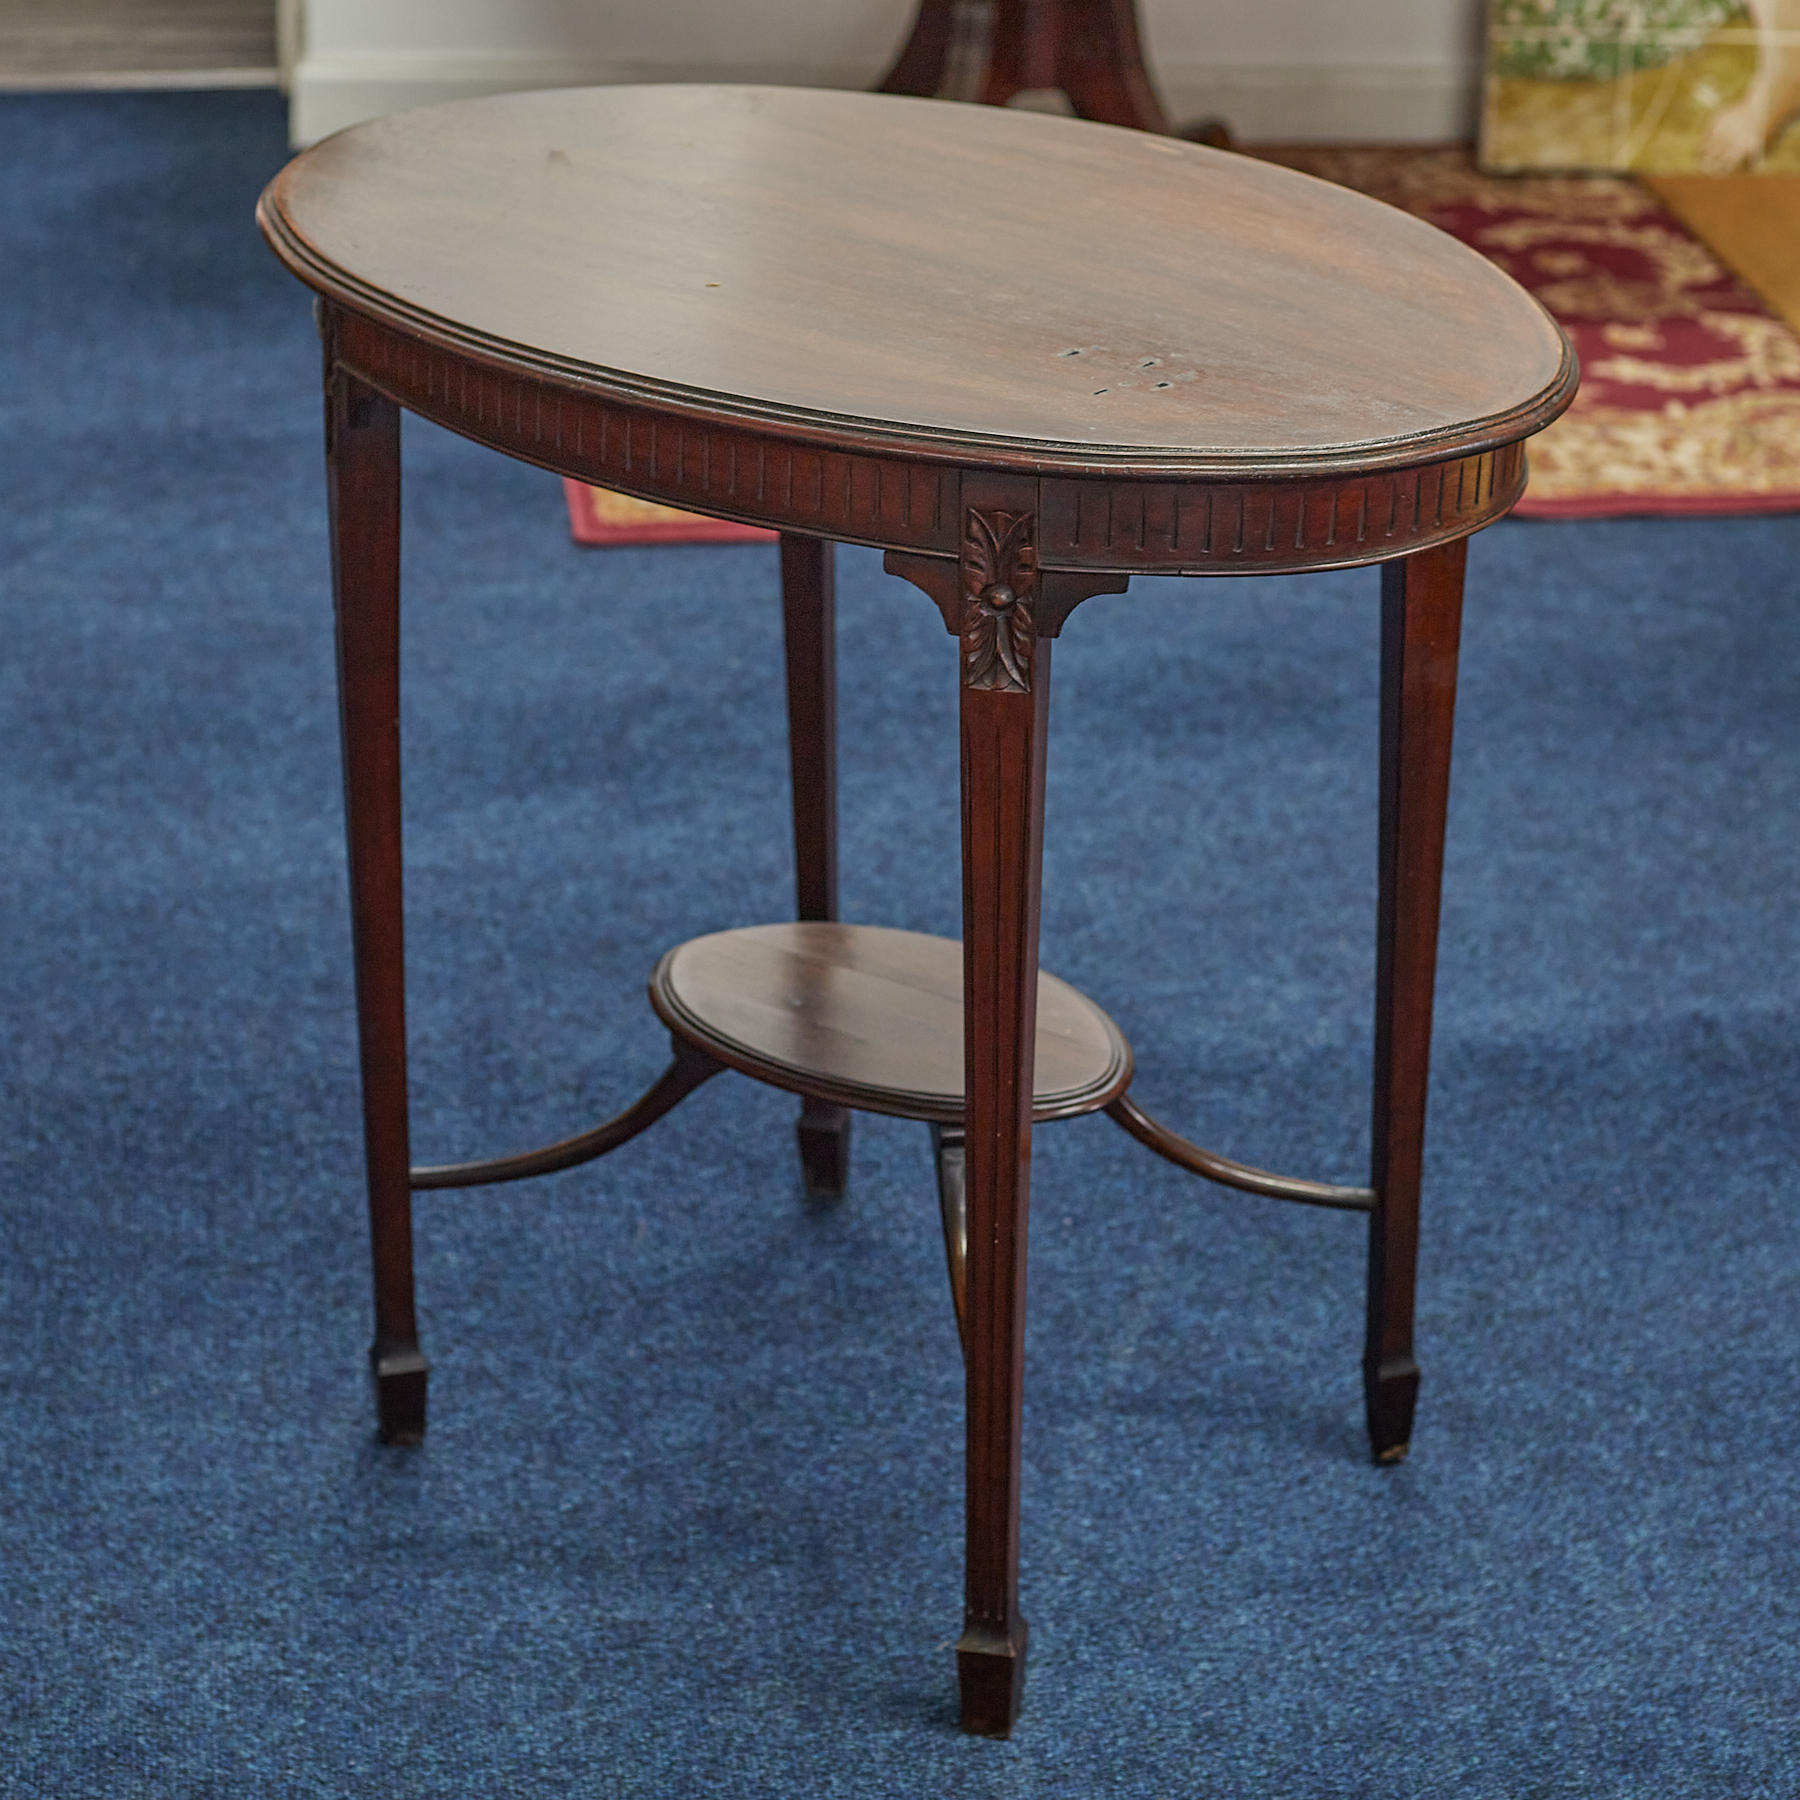 A 19th century octagonal mahogany pedestal wine table together with an oval two tier occasional - Image 3 of 3